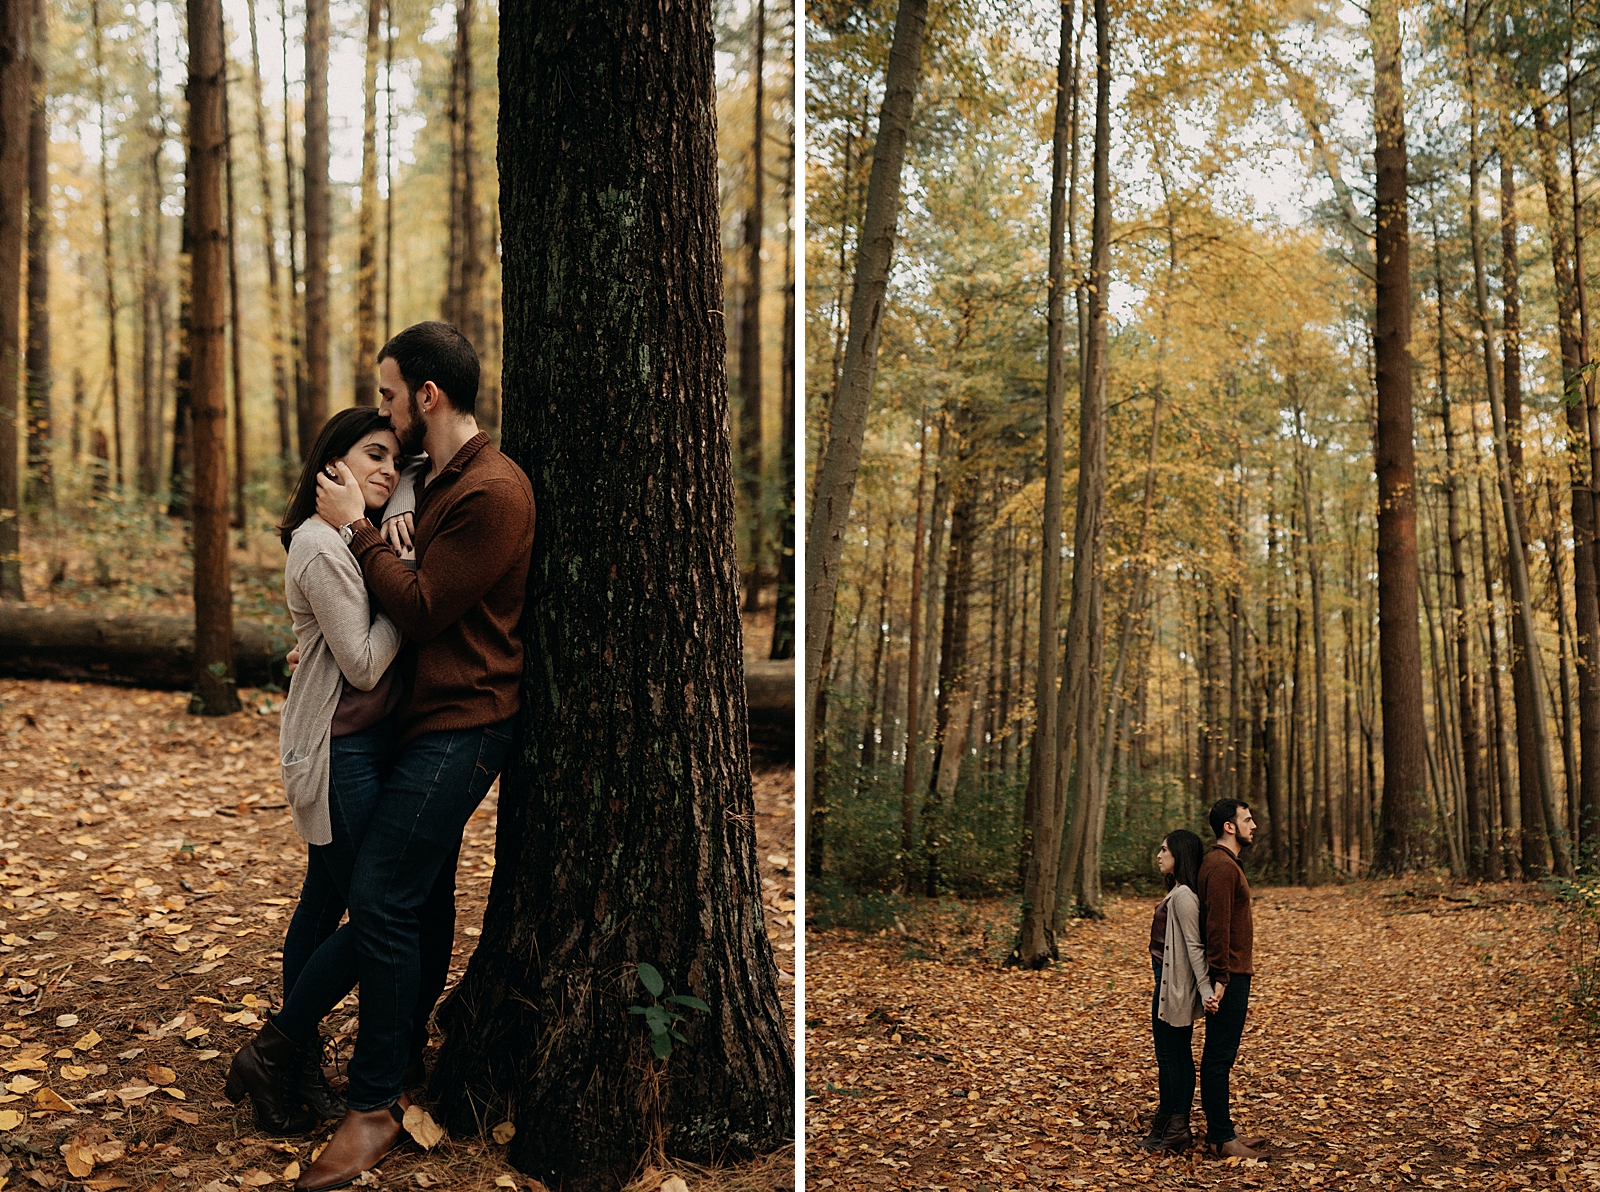 Couple holding each other leaning on tree with autumn leafs on the ground